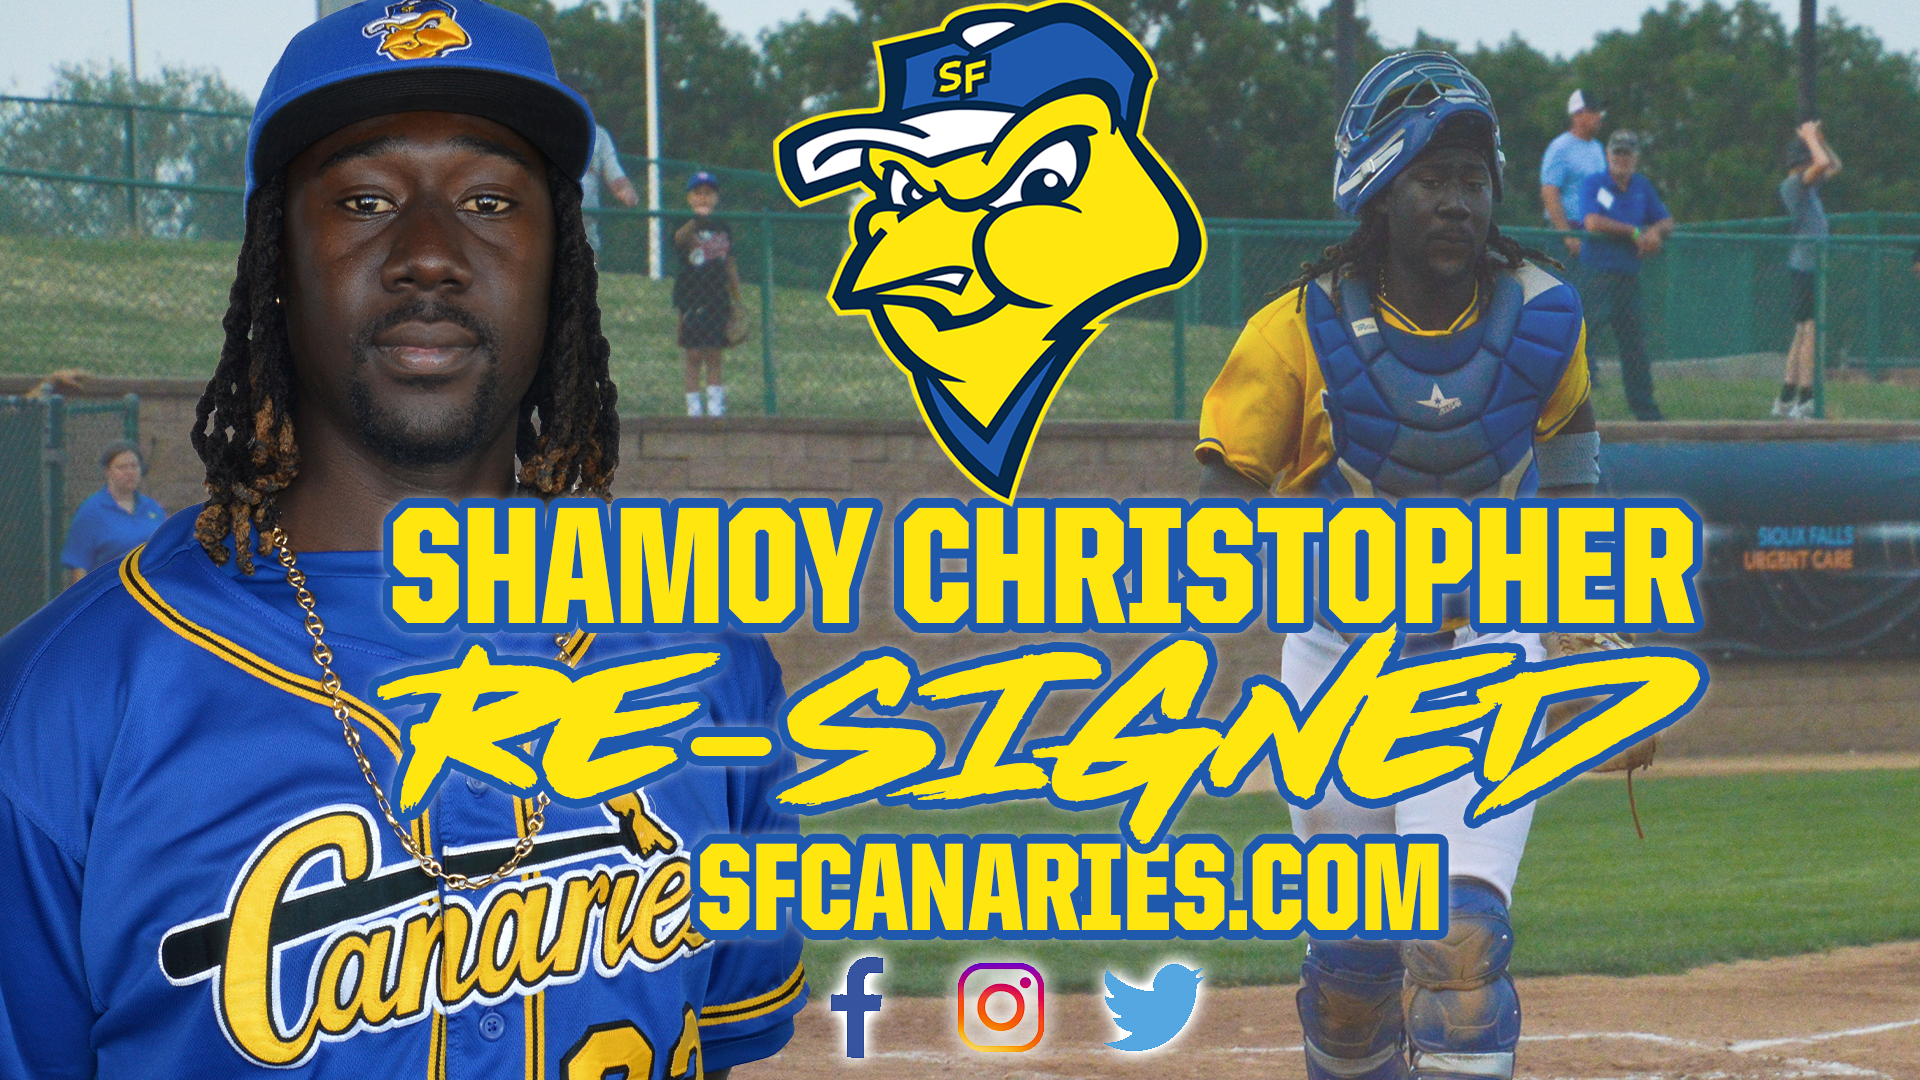 Canaries Re-Sign Catcher Shamoy Christopher